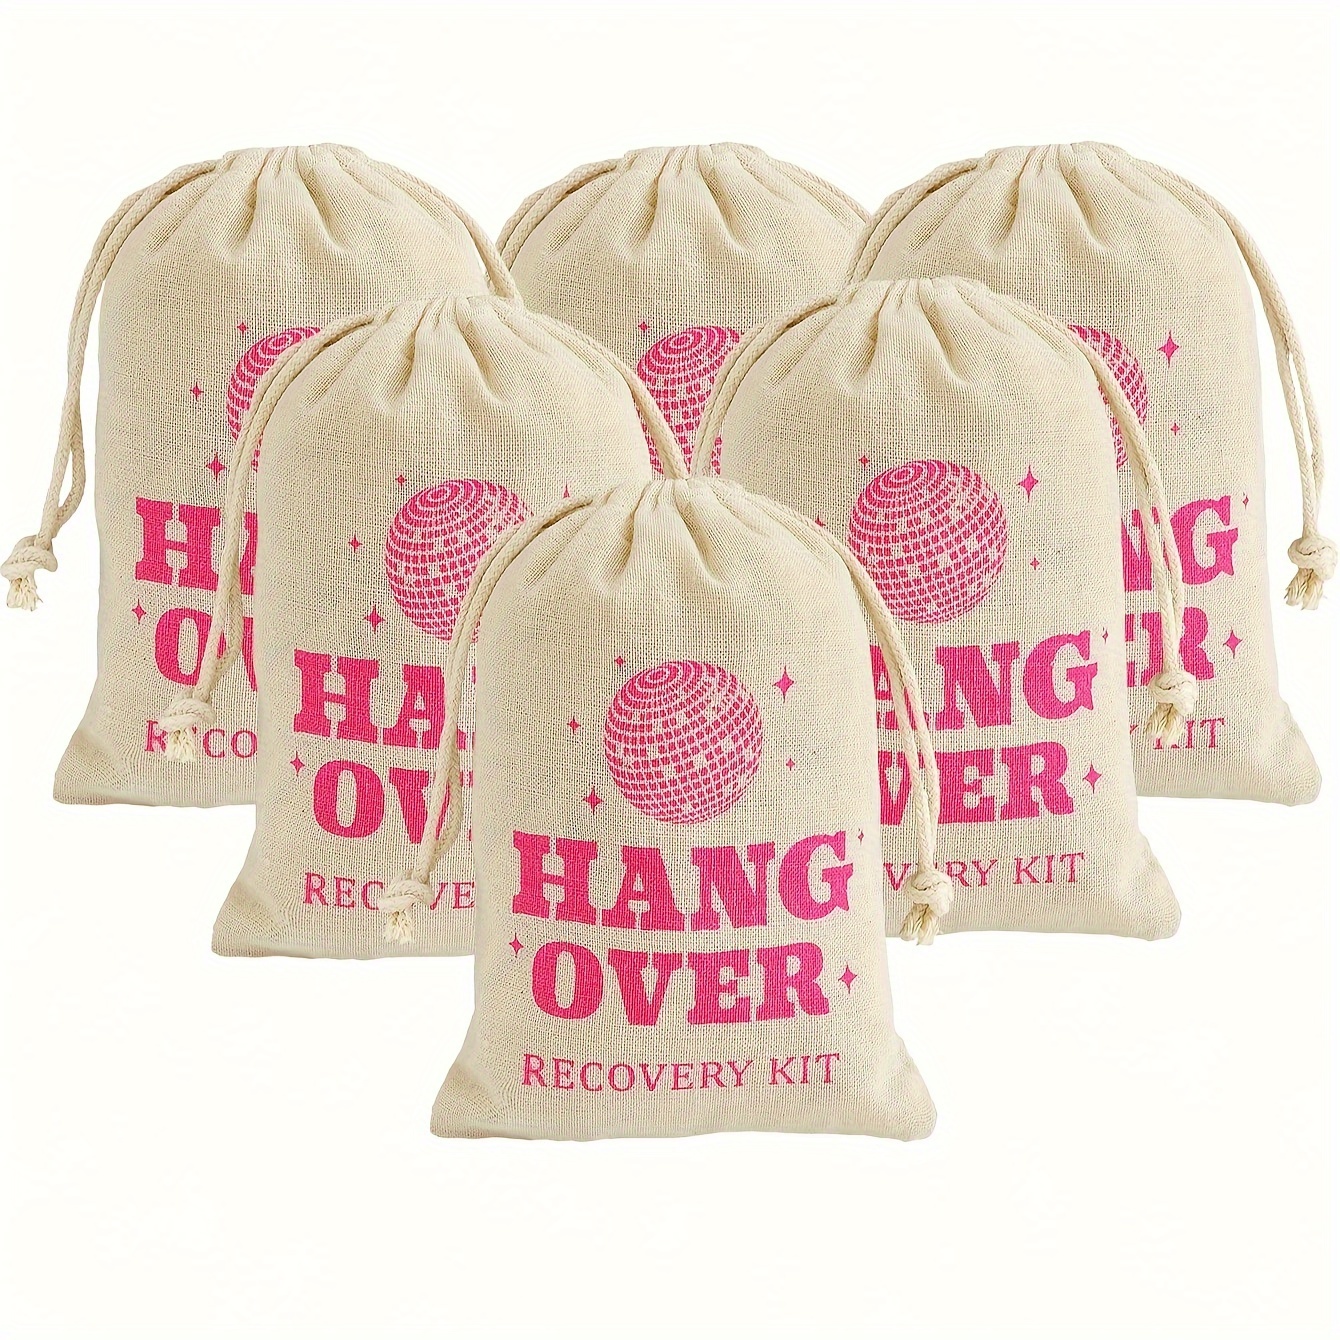  Set of 10 Bags Party Hangovers only last a day memories last  forever hangover kits bags hangover recovery kit bags wedding favor kit bag  bachelorette party survival kit bags Hangover recovery